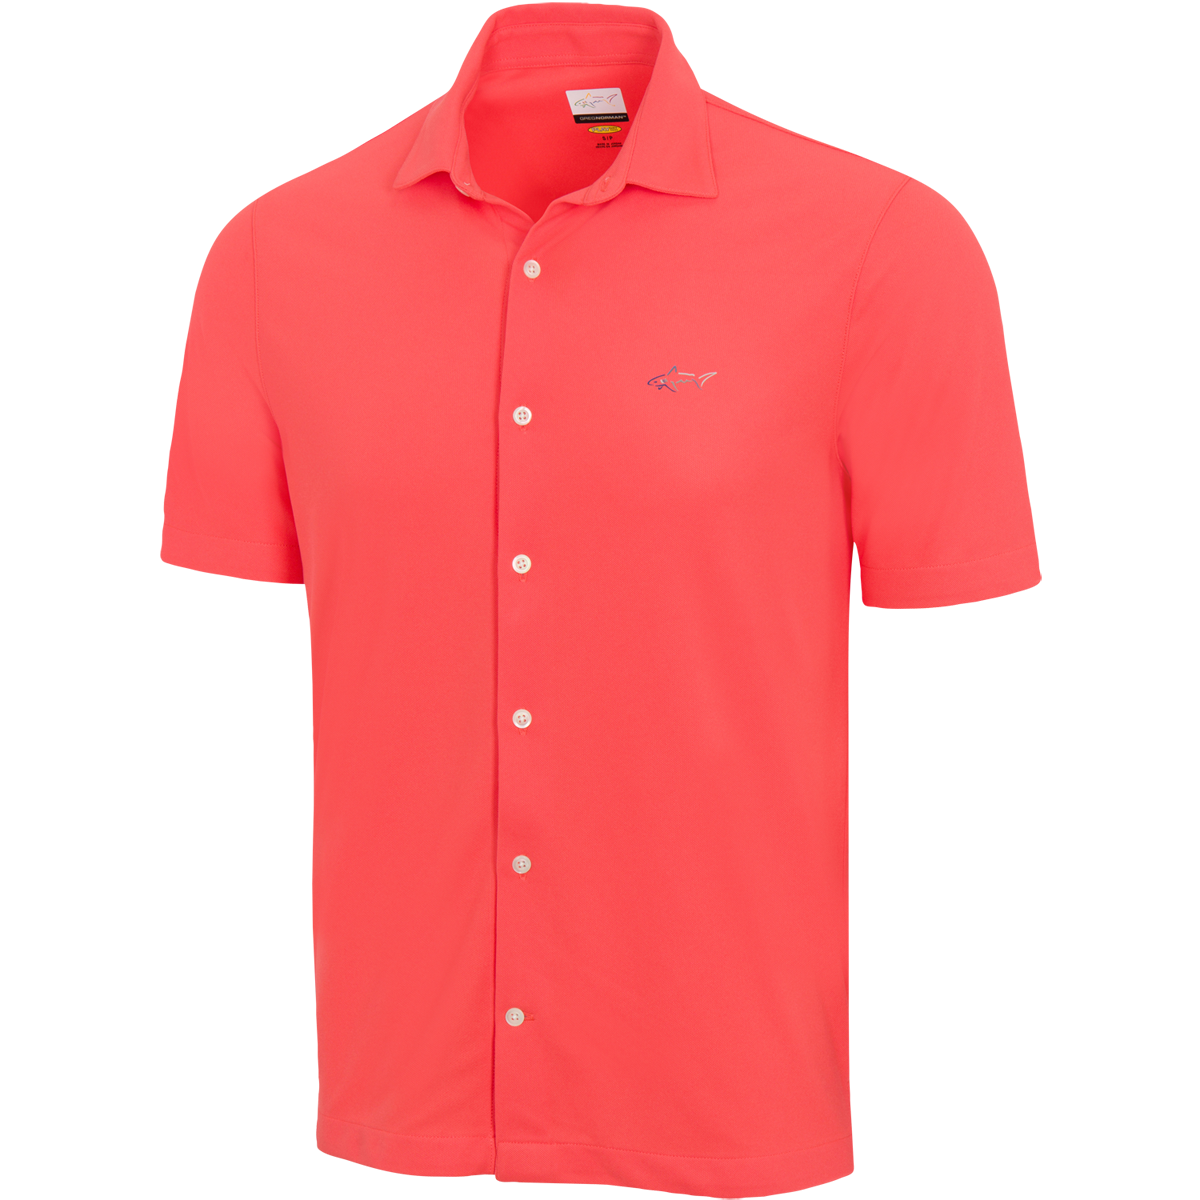 Greg Norman Polo Size 2X-Large – Yesterday's Attic